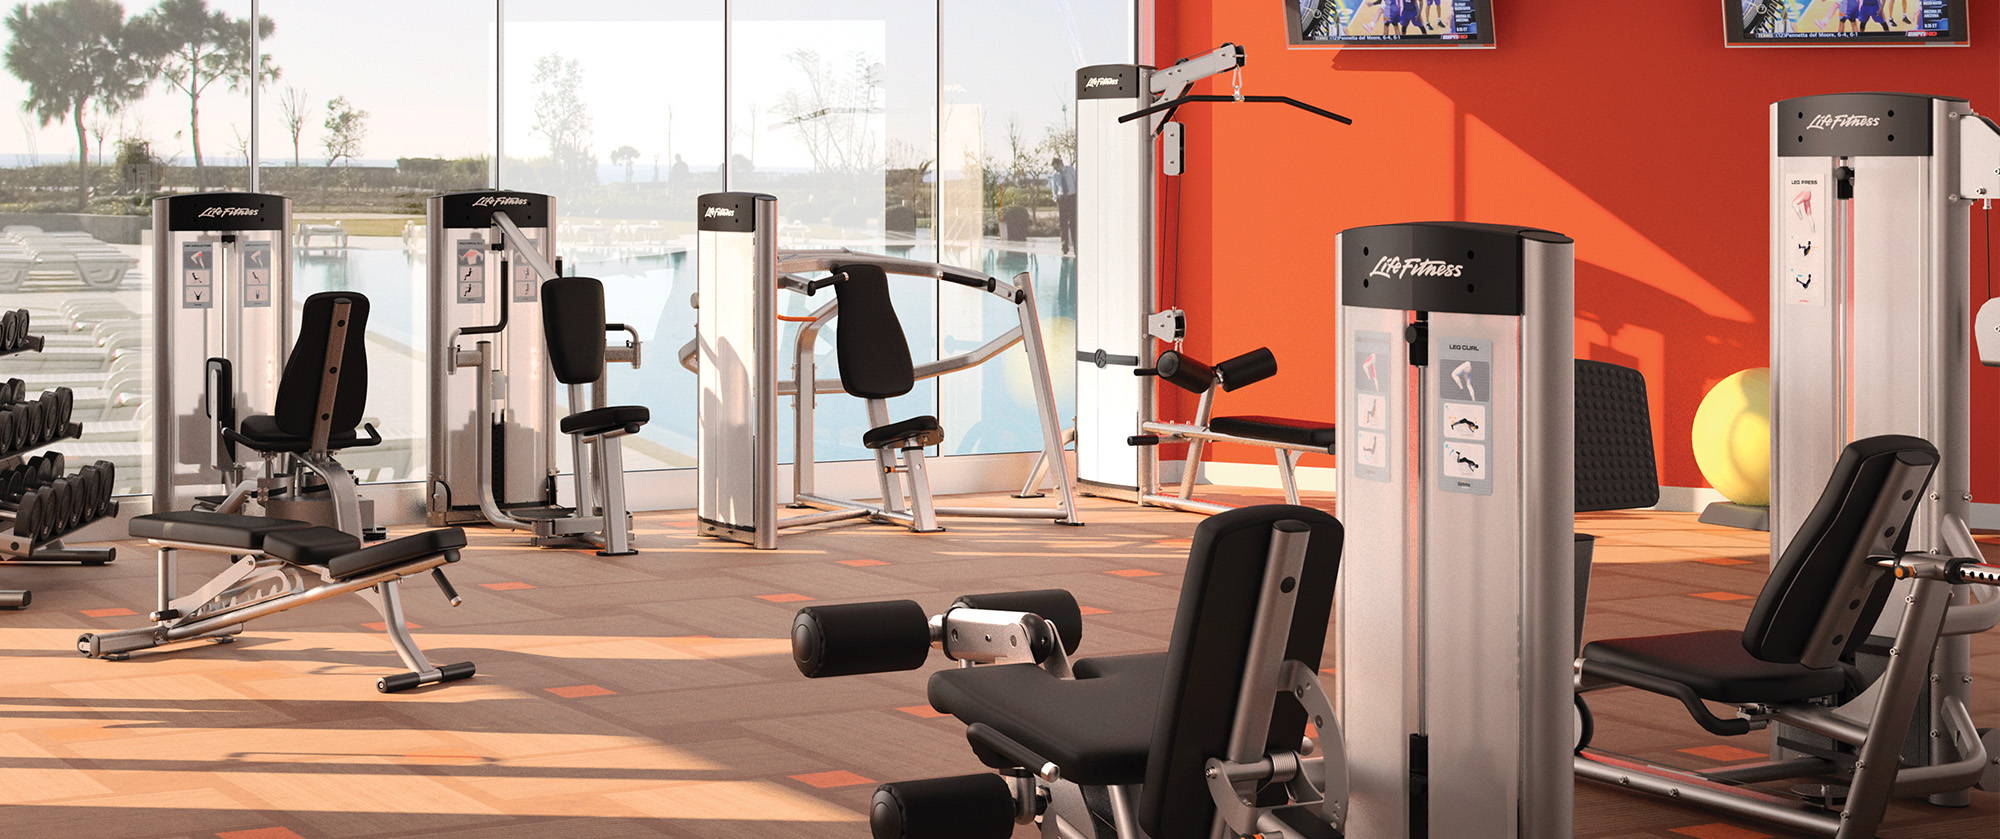 Life Fitness Optima Series selectroized machines in health club